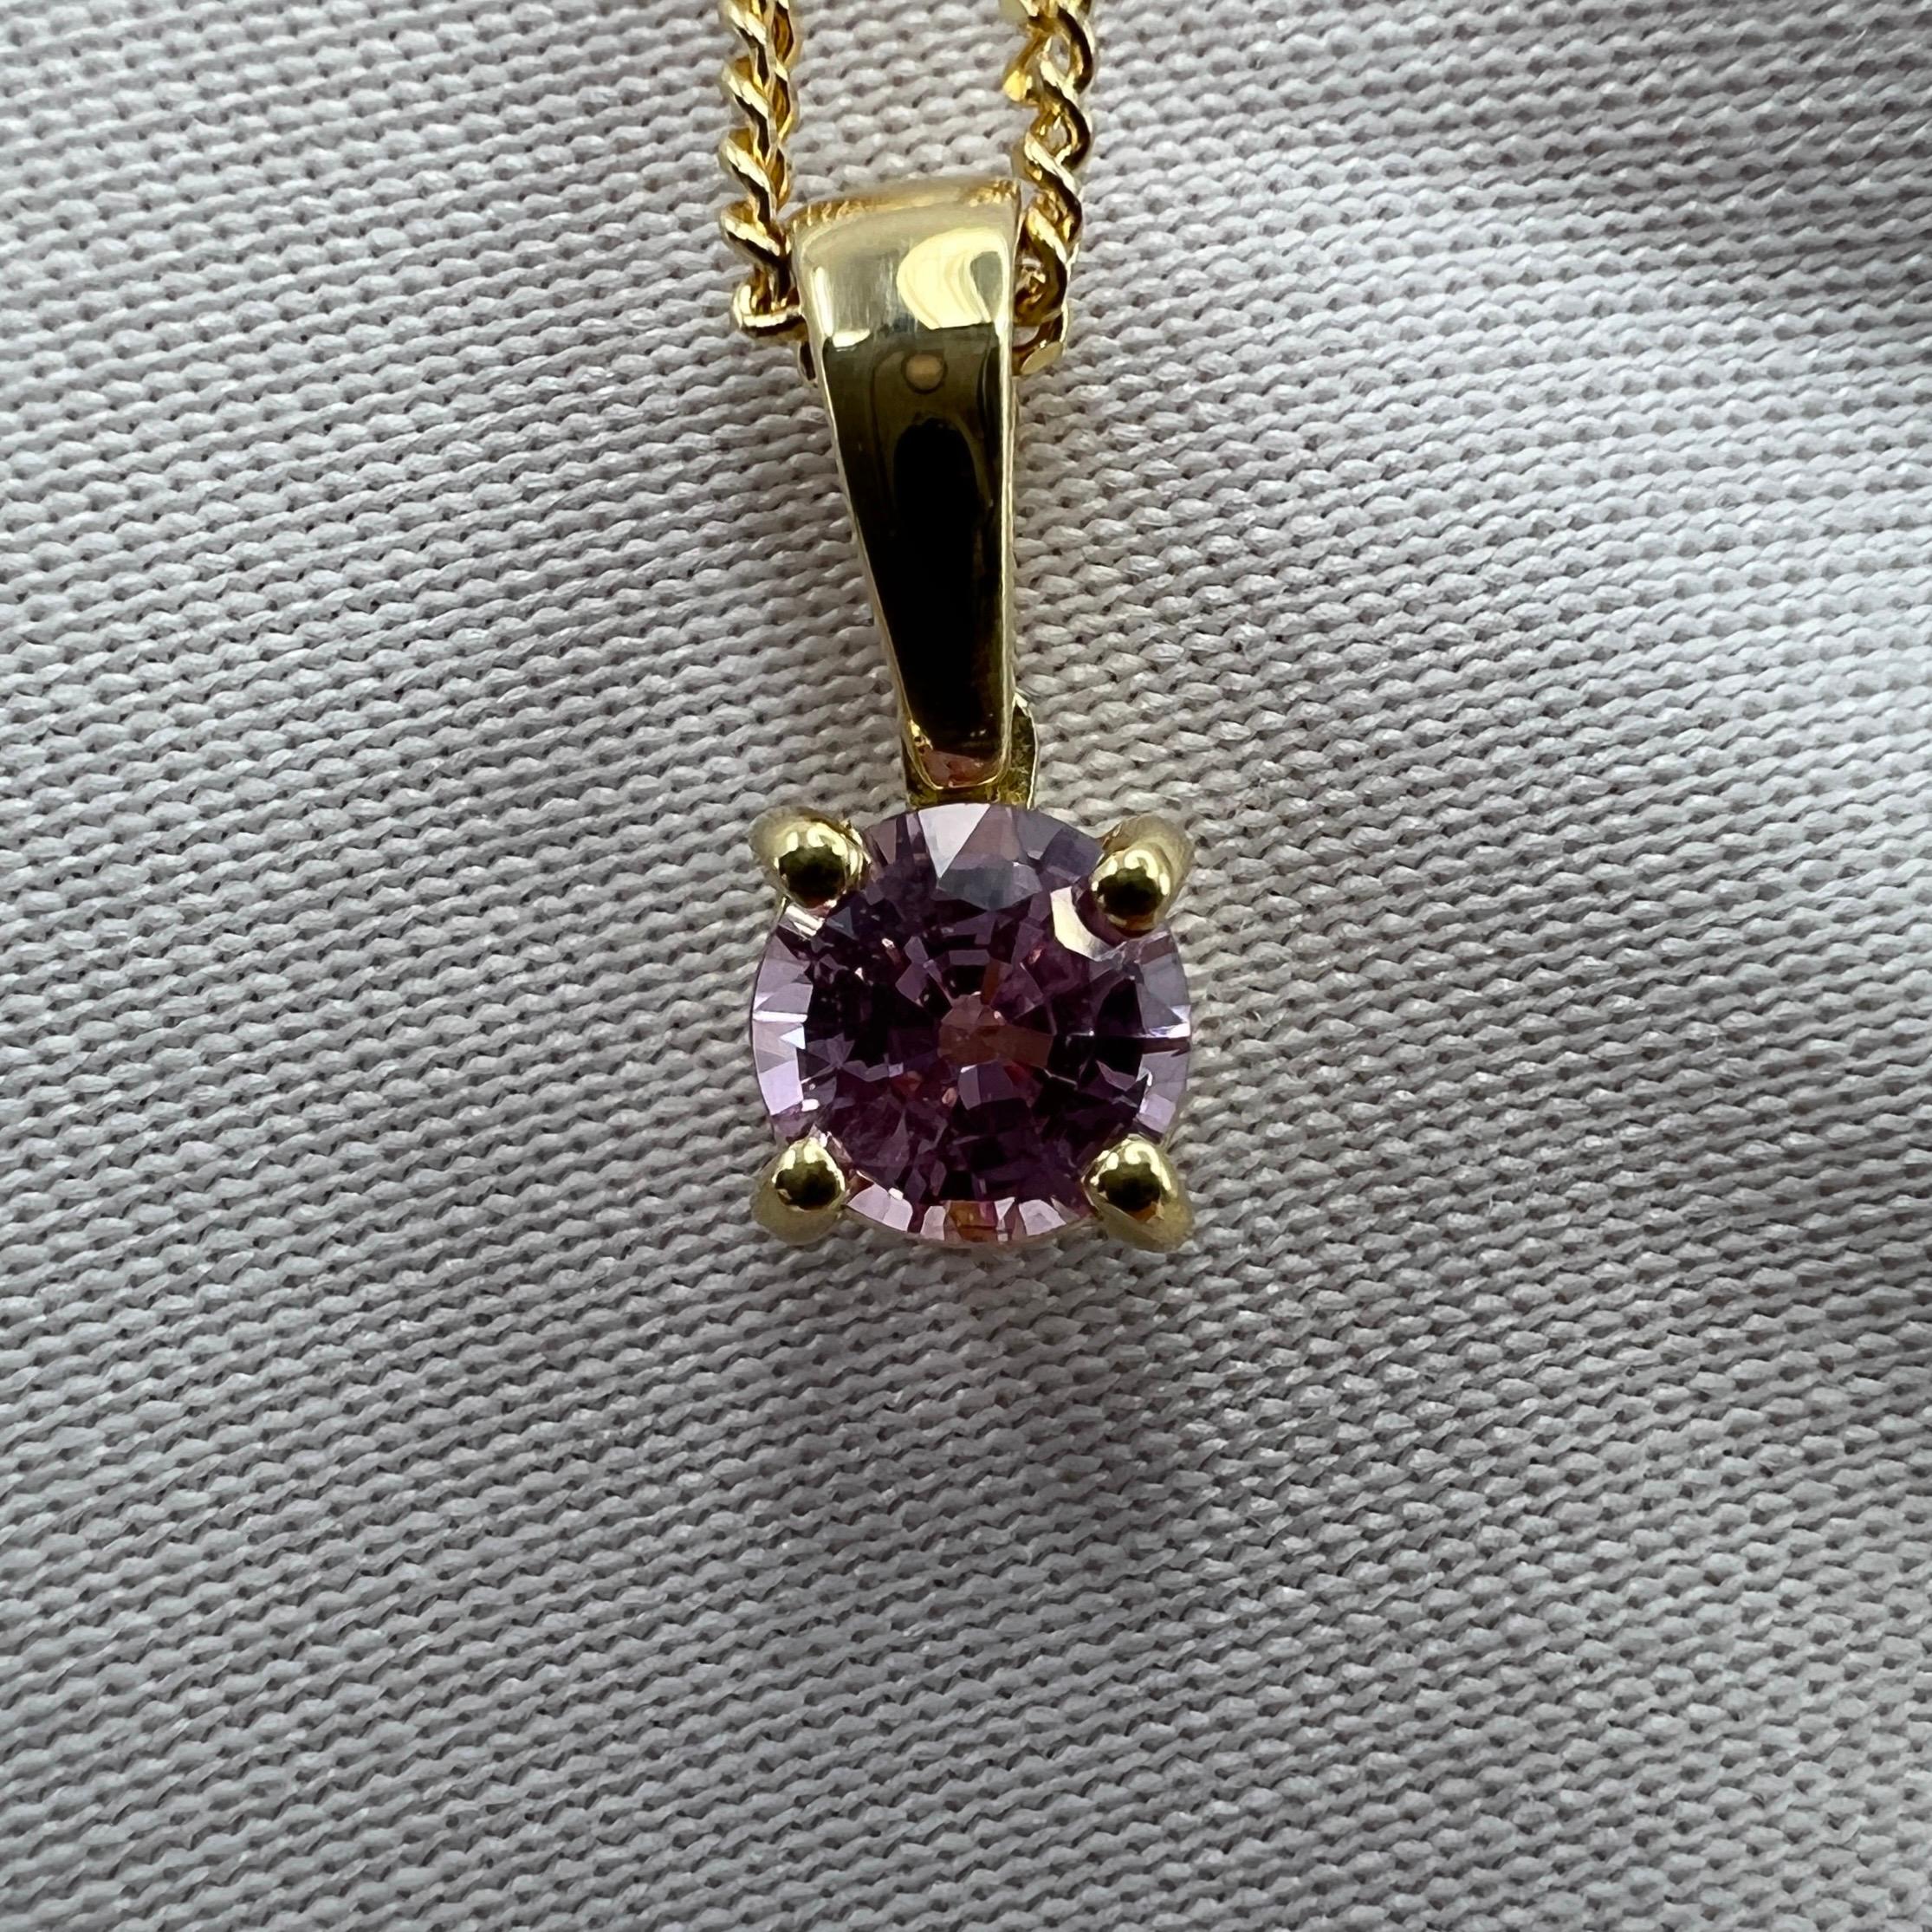 Fine Pink Ceylon Sapphire Round Cut 18k White Gold Solitaire Pendant.

0.40 Carat sapphire with a beautiful fine pink colour and excellent clarity, very clean stone. Also has an excellent round brilliant cut showing lots of light return and